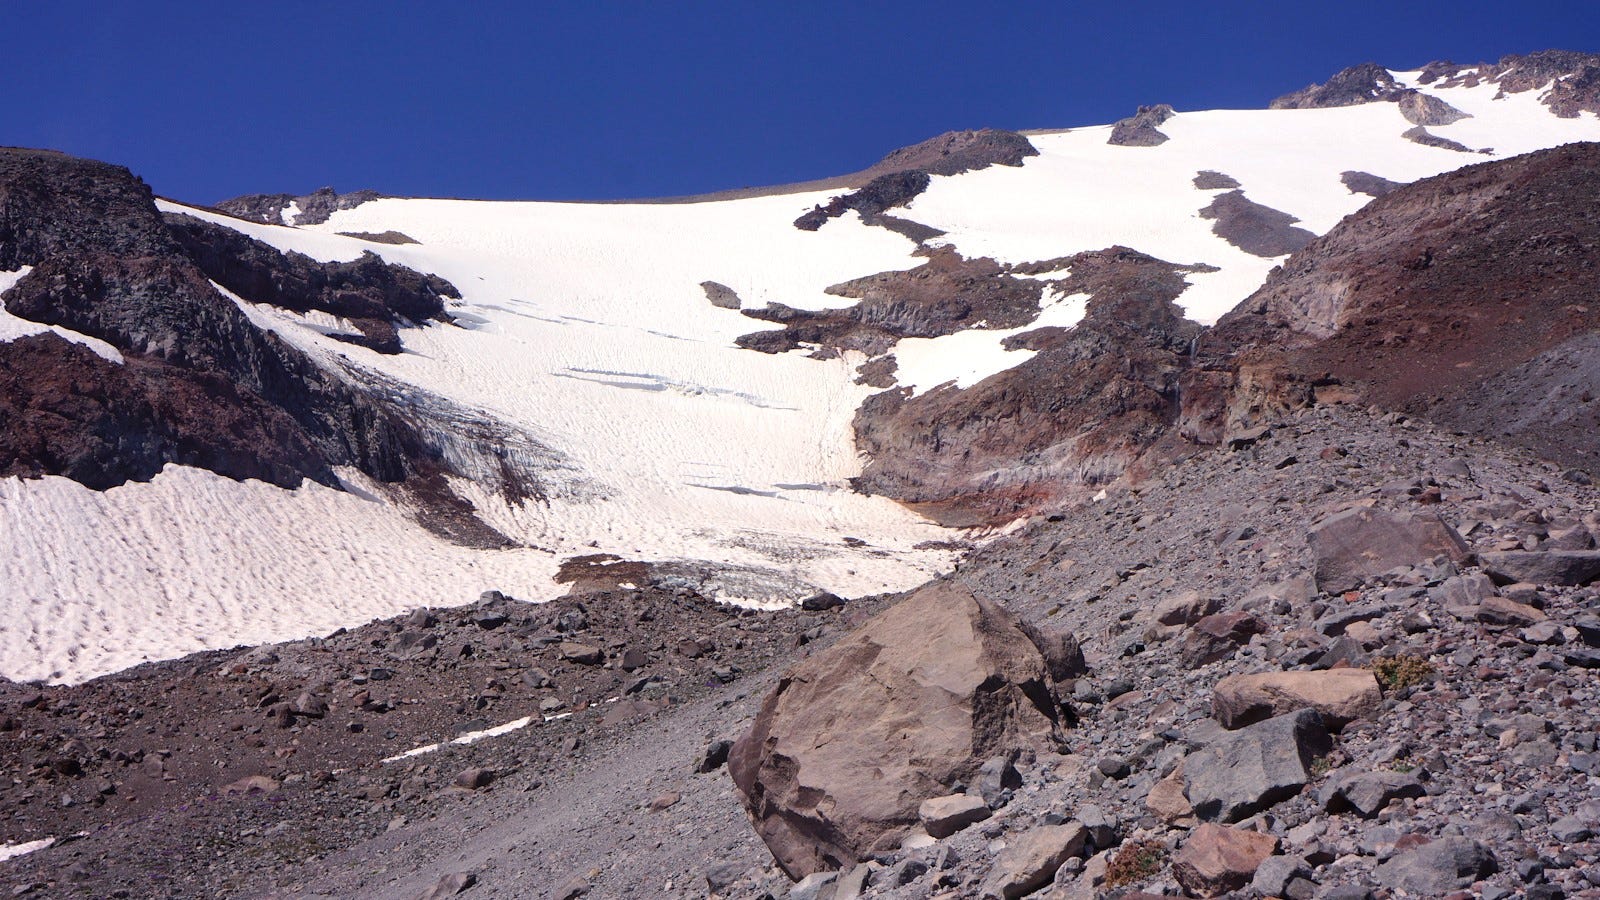 The Wintun Glacier is located on the west side of Mt. Shasta.